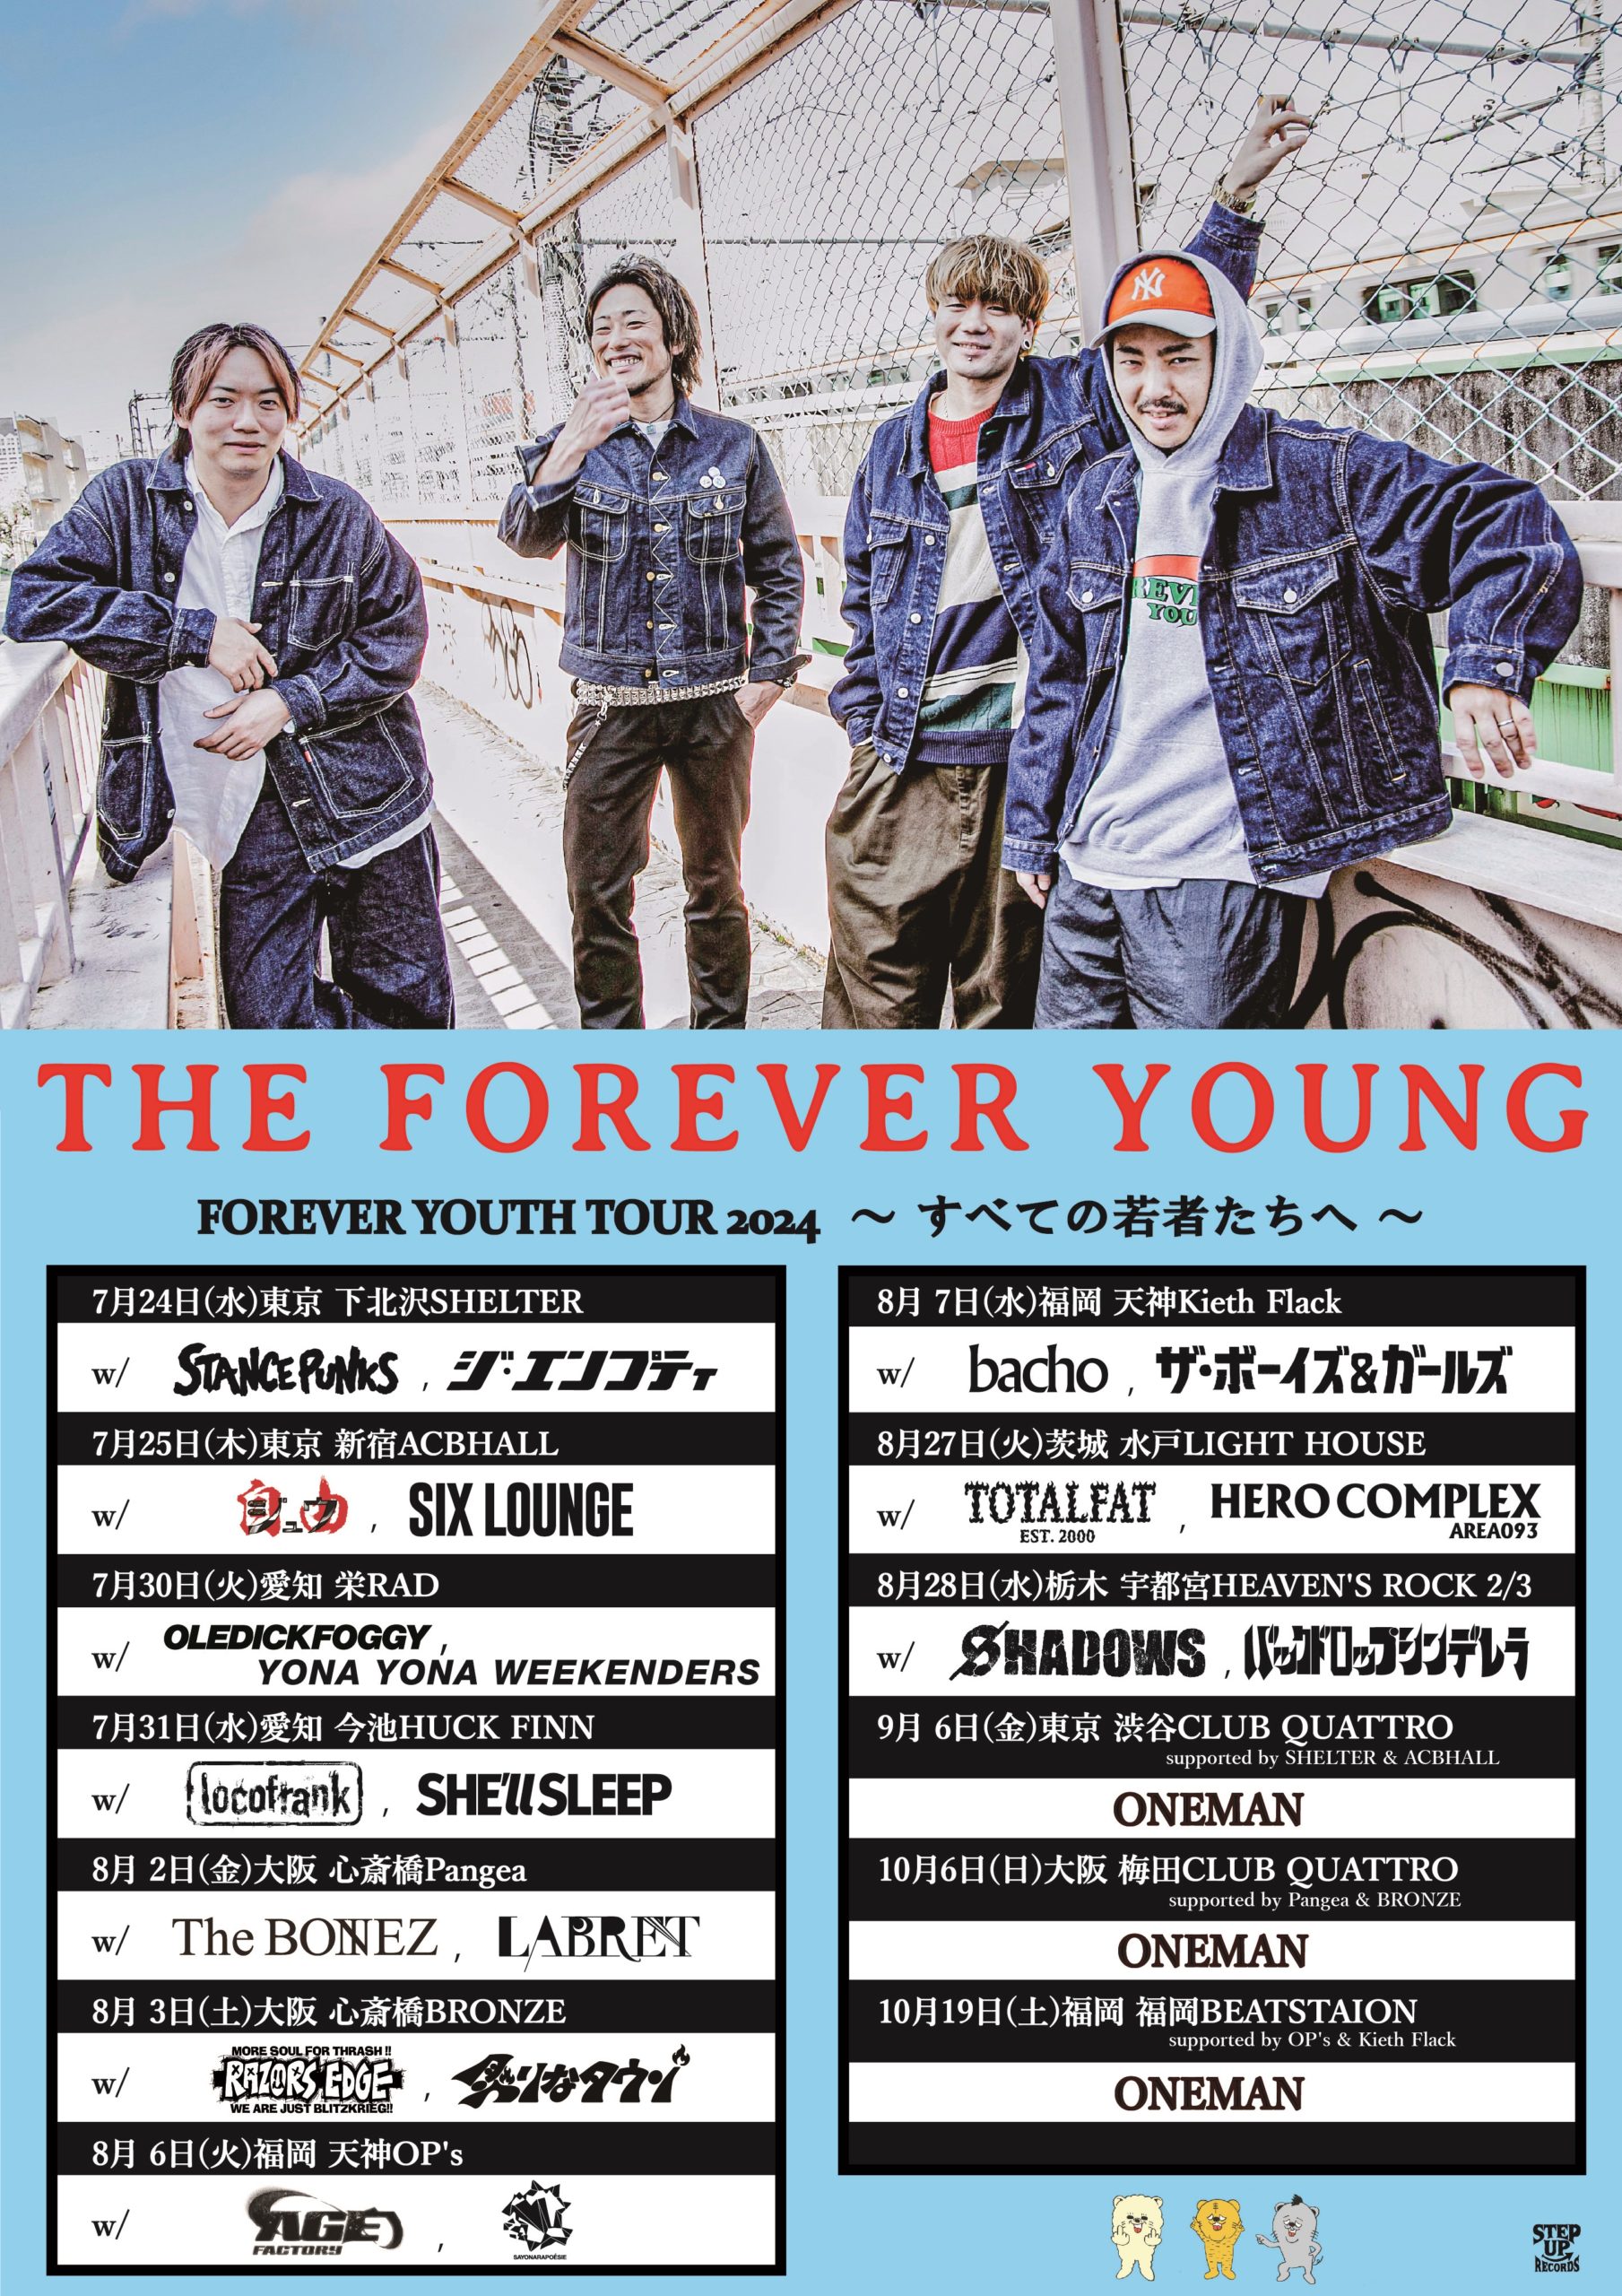 THE FOREVER YOUNG "FOREVER YOUTH TOUR 2024 ~すべての若者たちへ~"